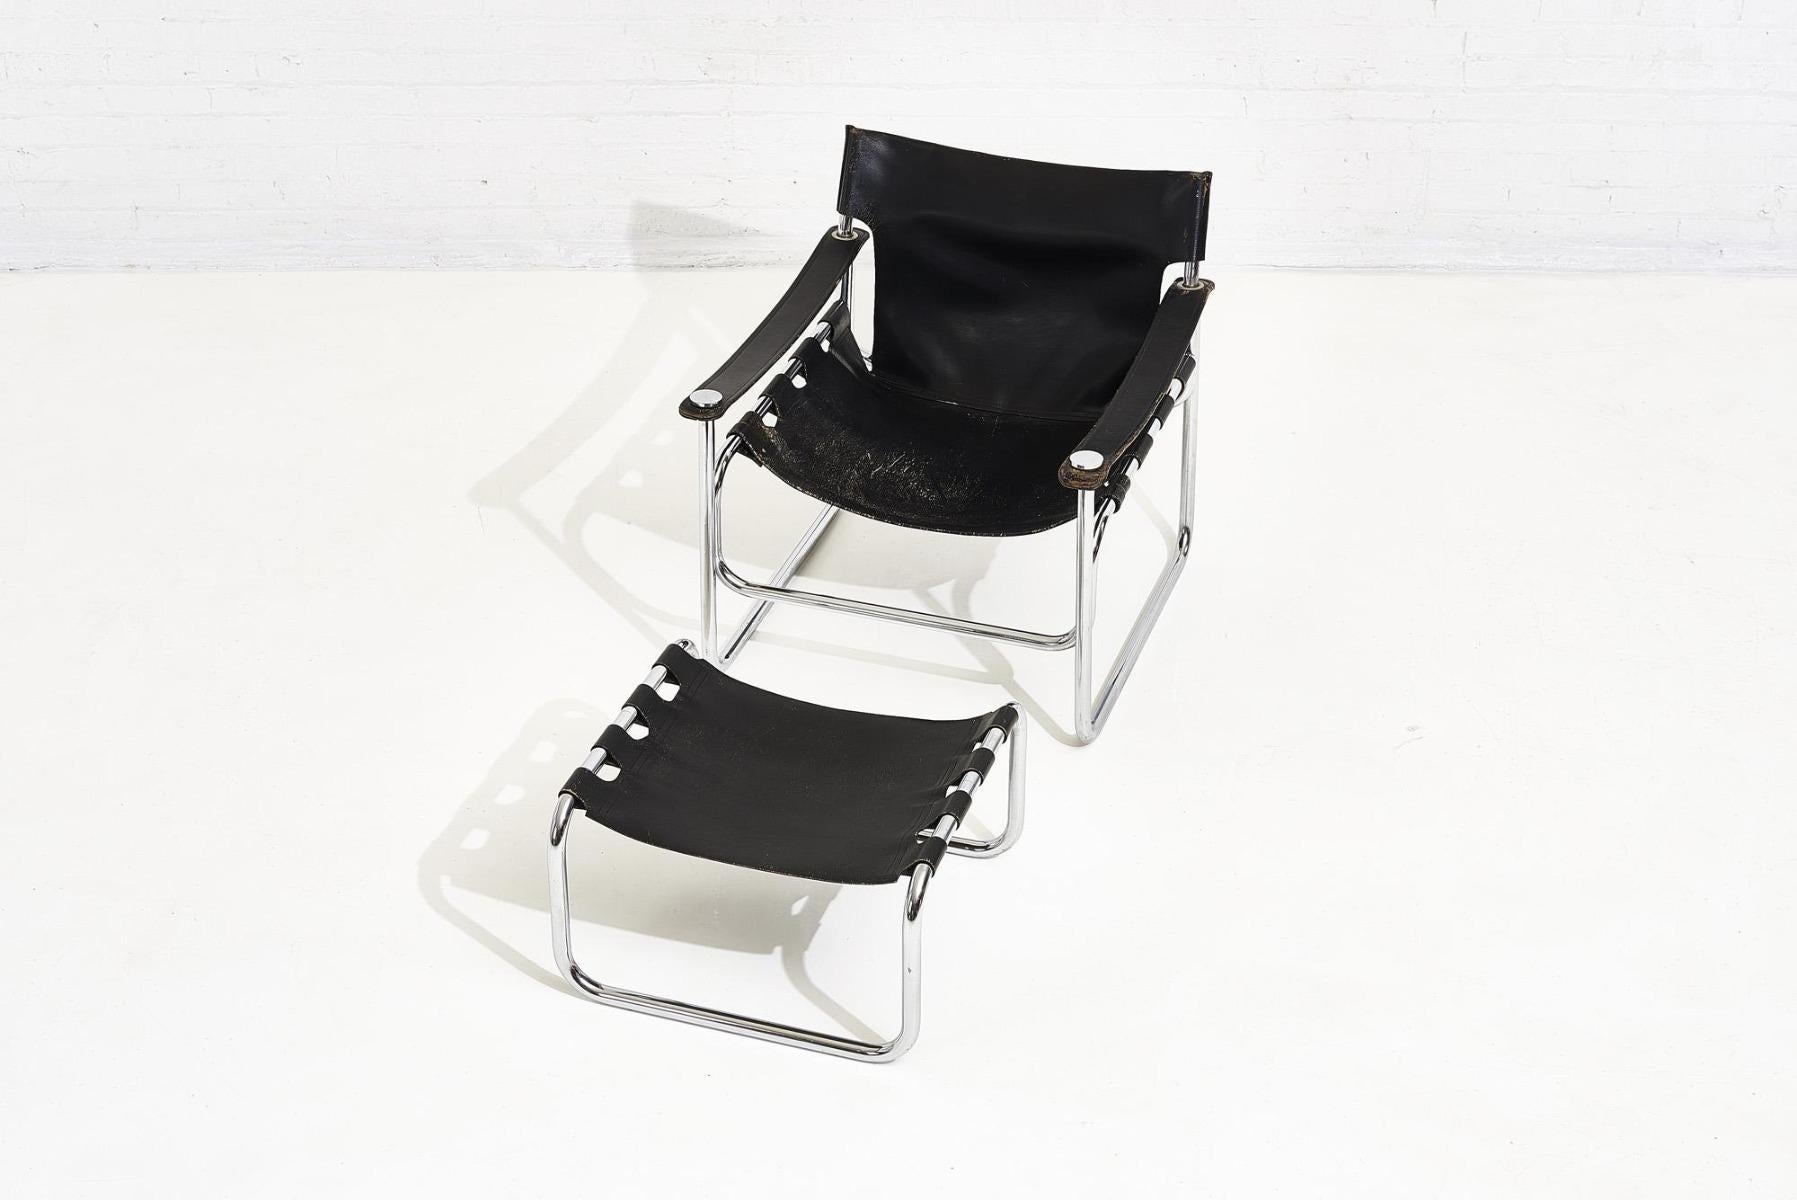 Black leather sling chair and ottoman, 1970. Attributed to Pascal Mourgue.
Dimensions:
26 T
27 W
32 D
12 SH

ottoman
22 W
12 T
22 D.